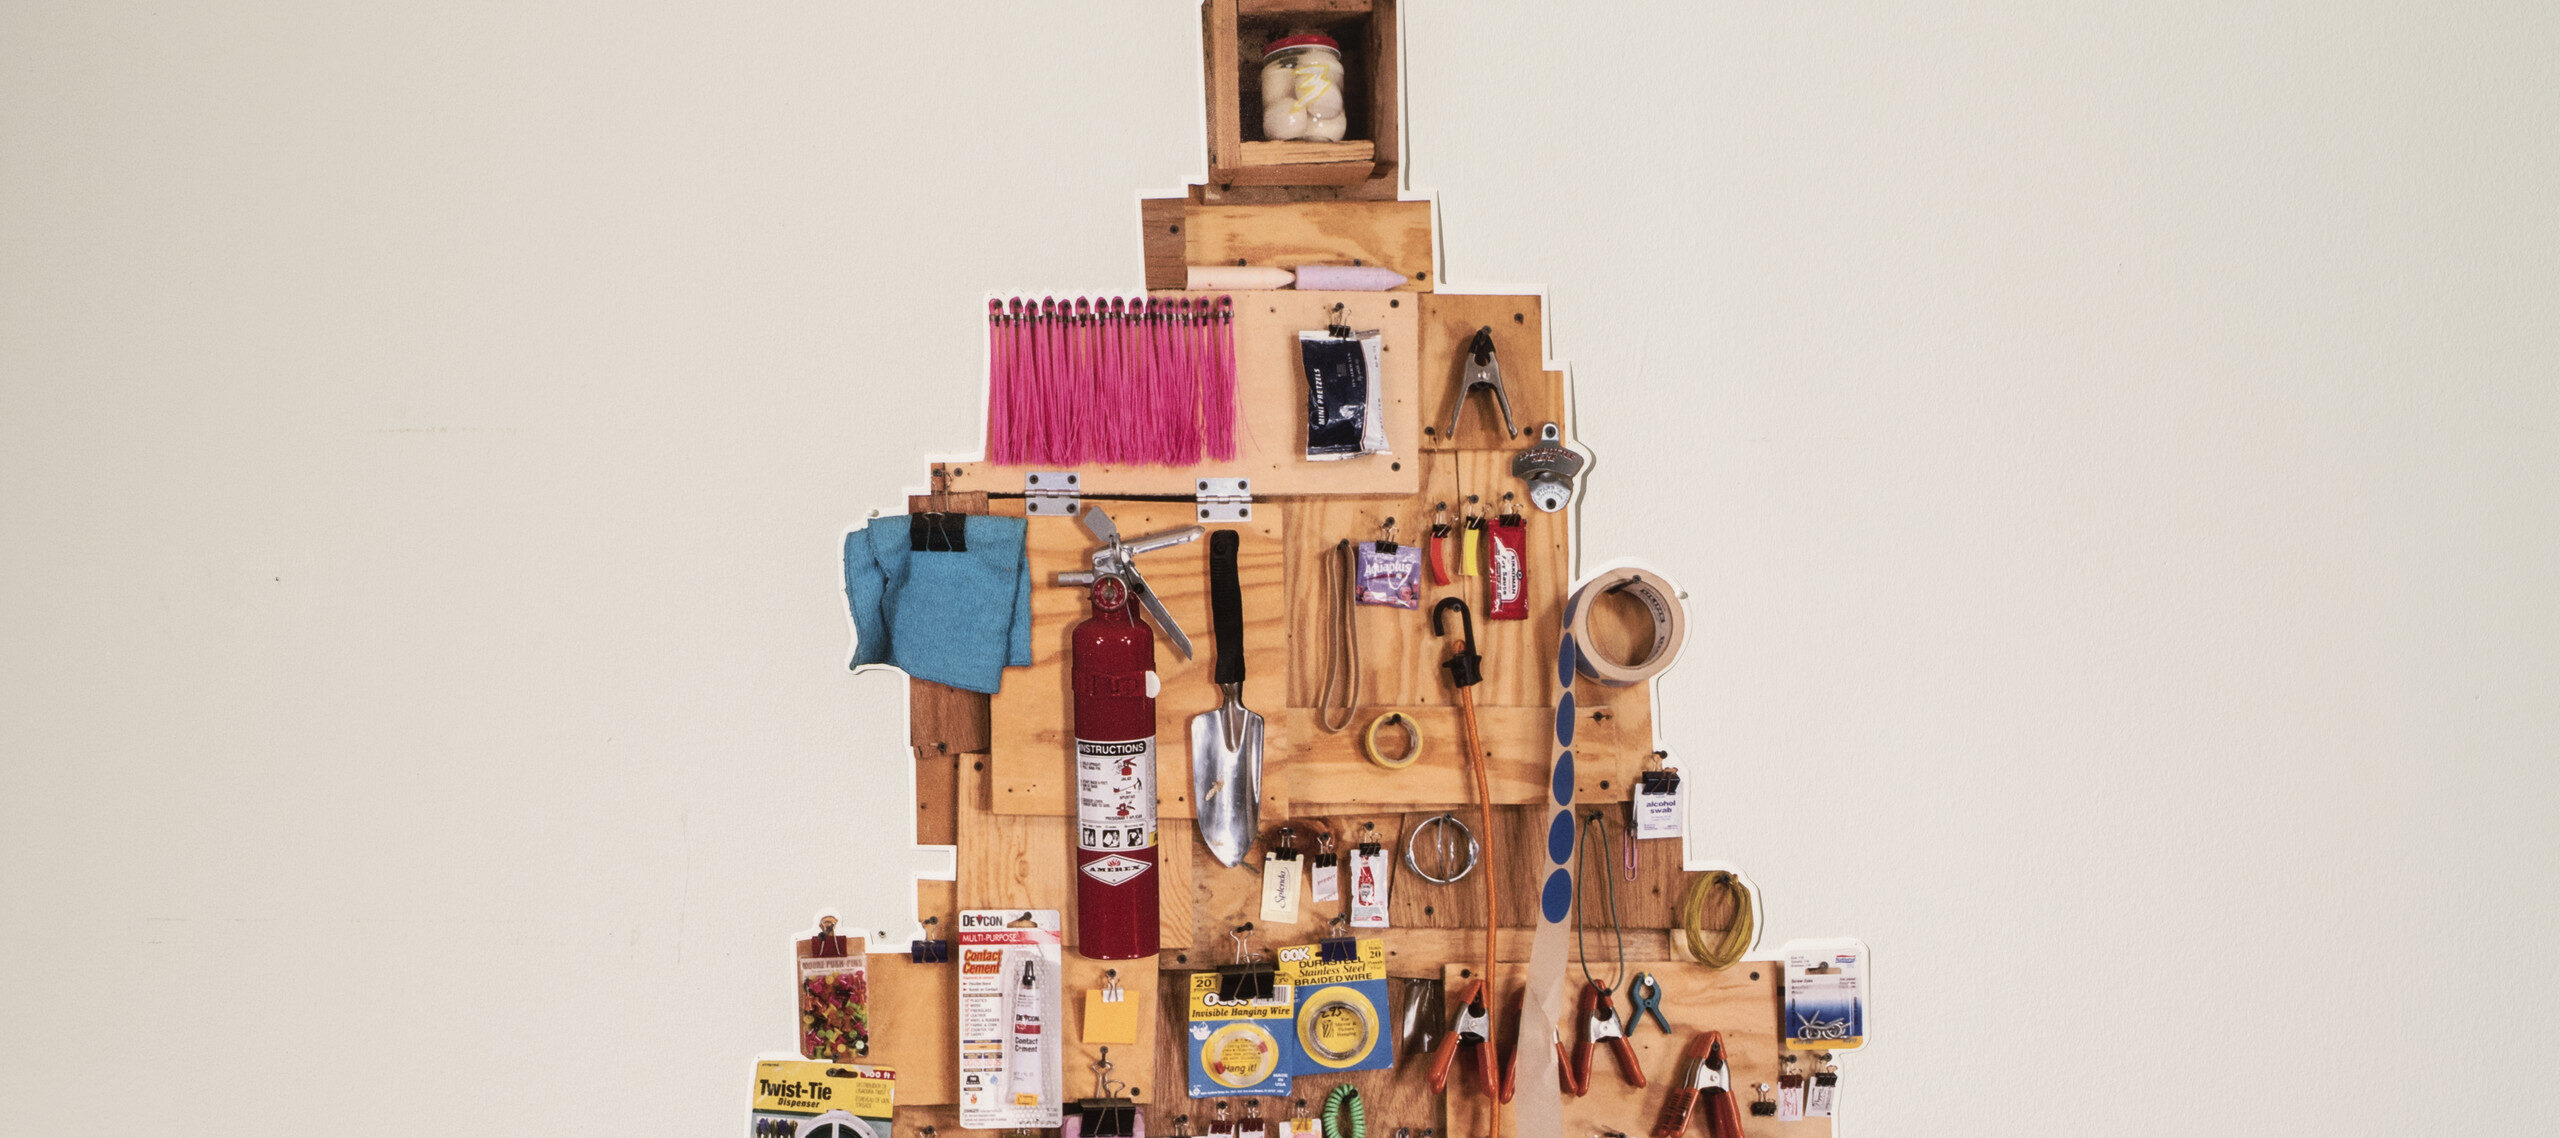 Wooden rectangles in different shades and sizes arranged in the shape of a pine tree, covered in in a colorful, eclectic, hanging assortment of common household and gardening tools—such as a trowel, rolls of tape, gardening gloves, a fire extinguisher, rulers, and more.